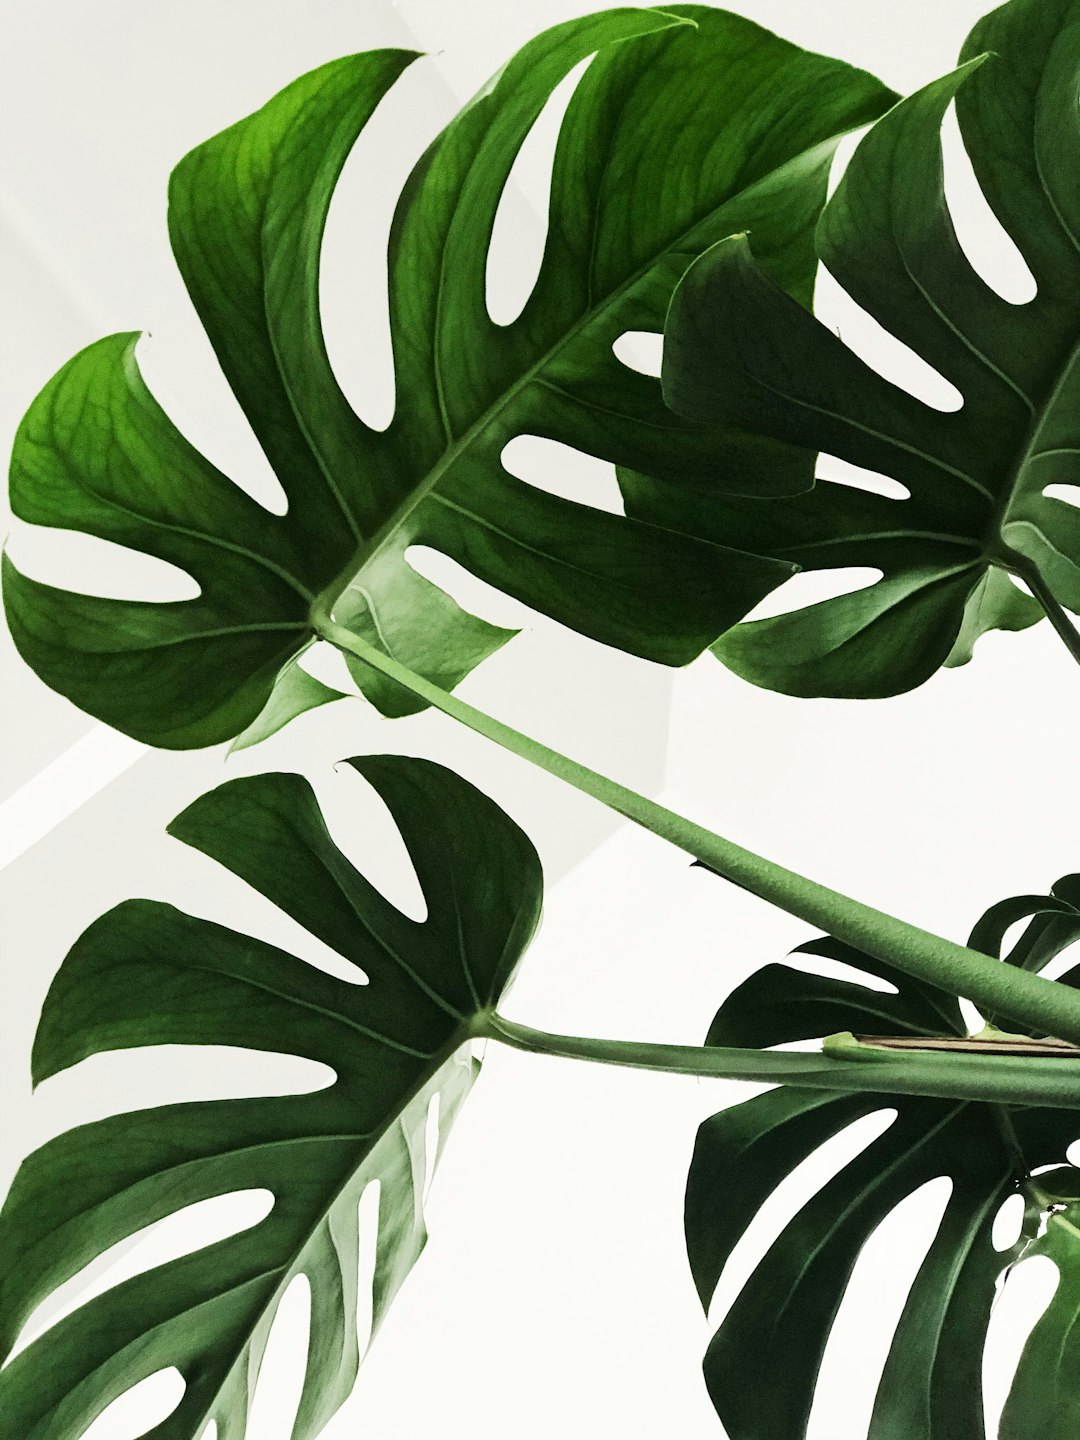 A closeup of monstera leaves on white background, simple and clean, with large green leaf details. The plants have long stems and appear fresh in the photo. –ar 3:4